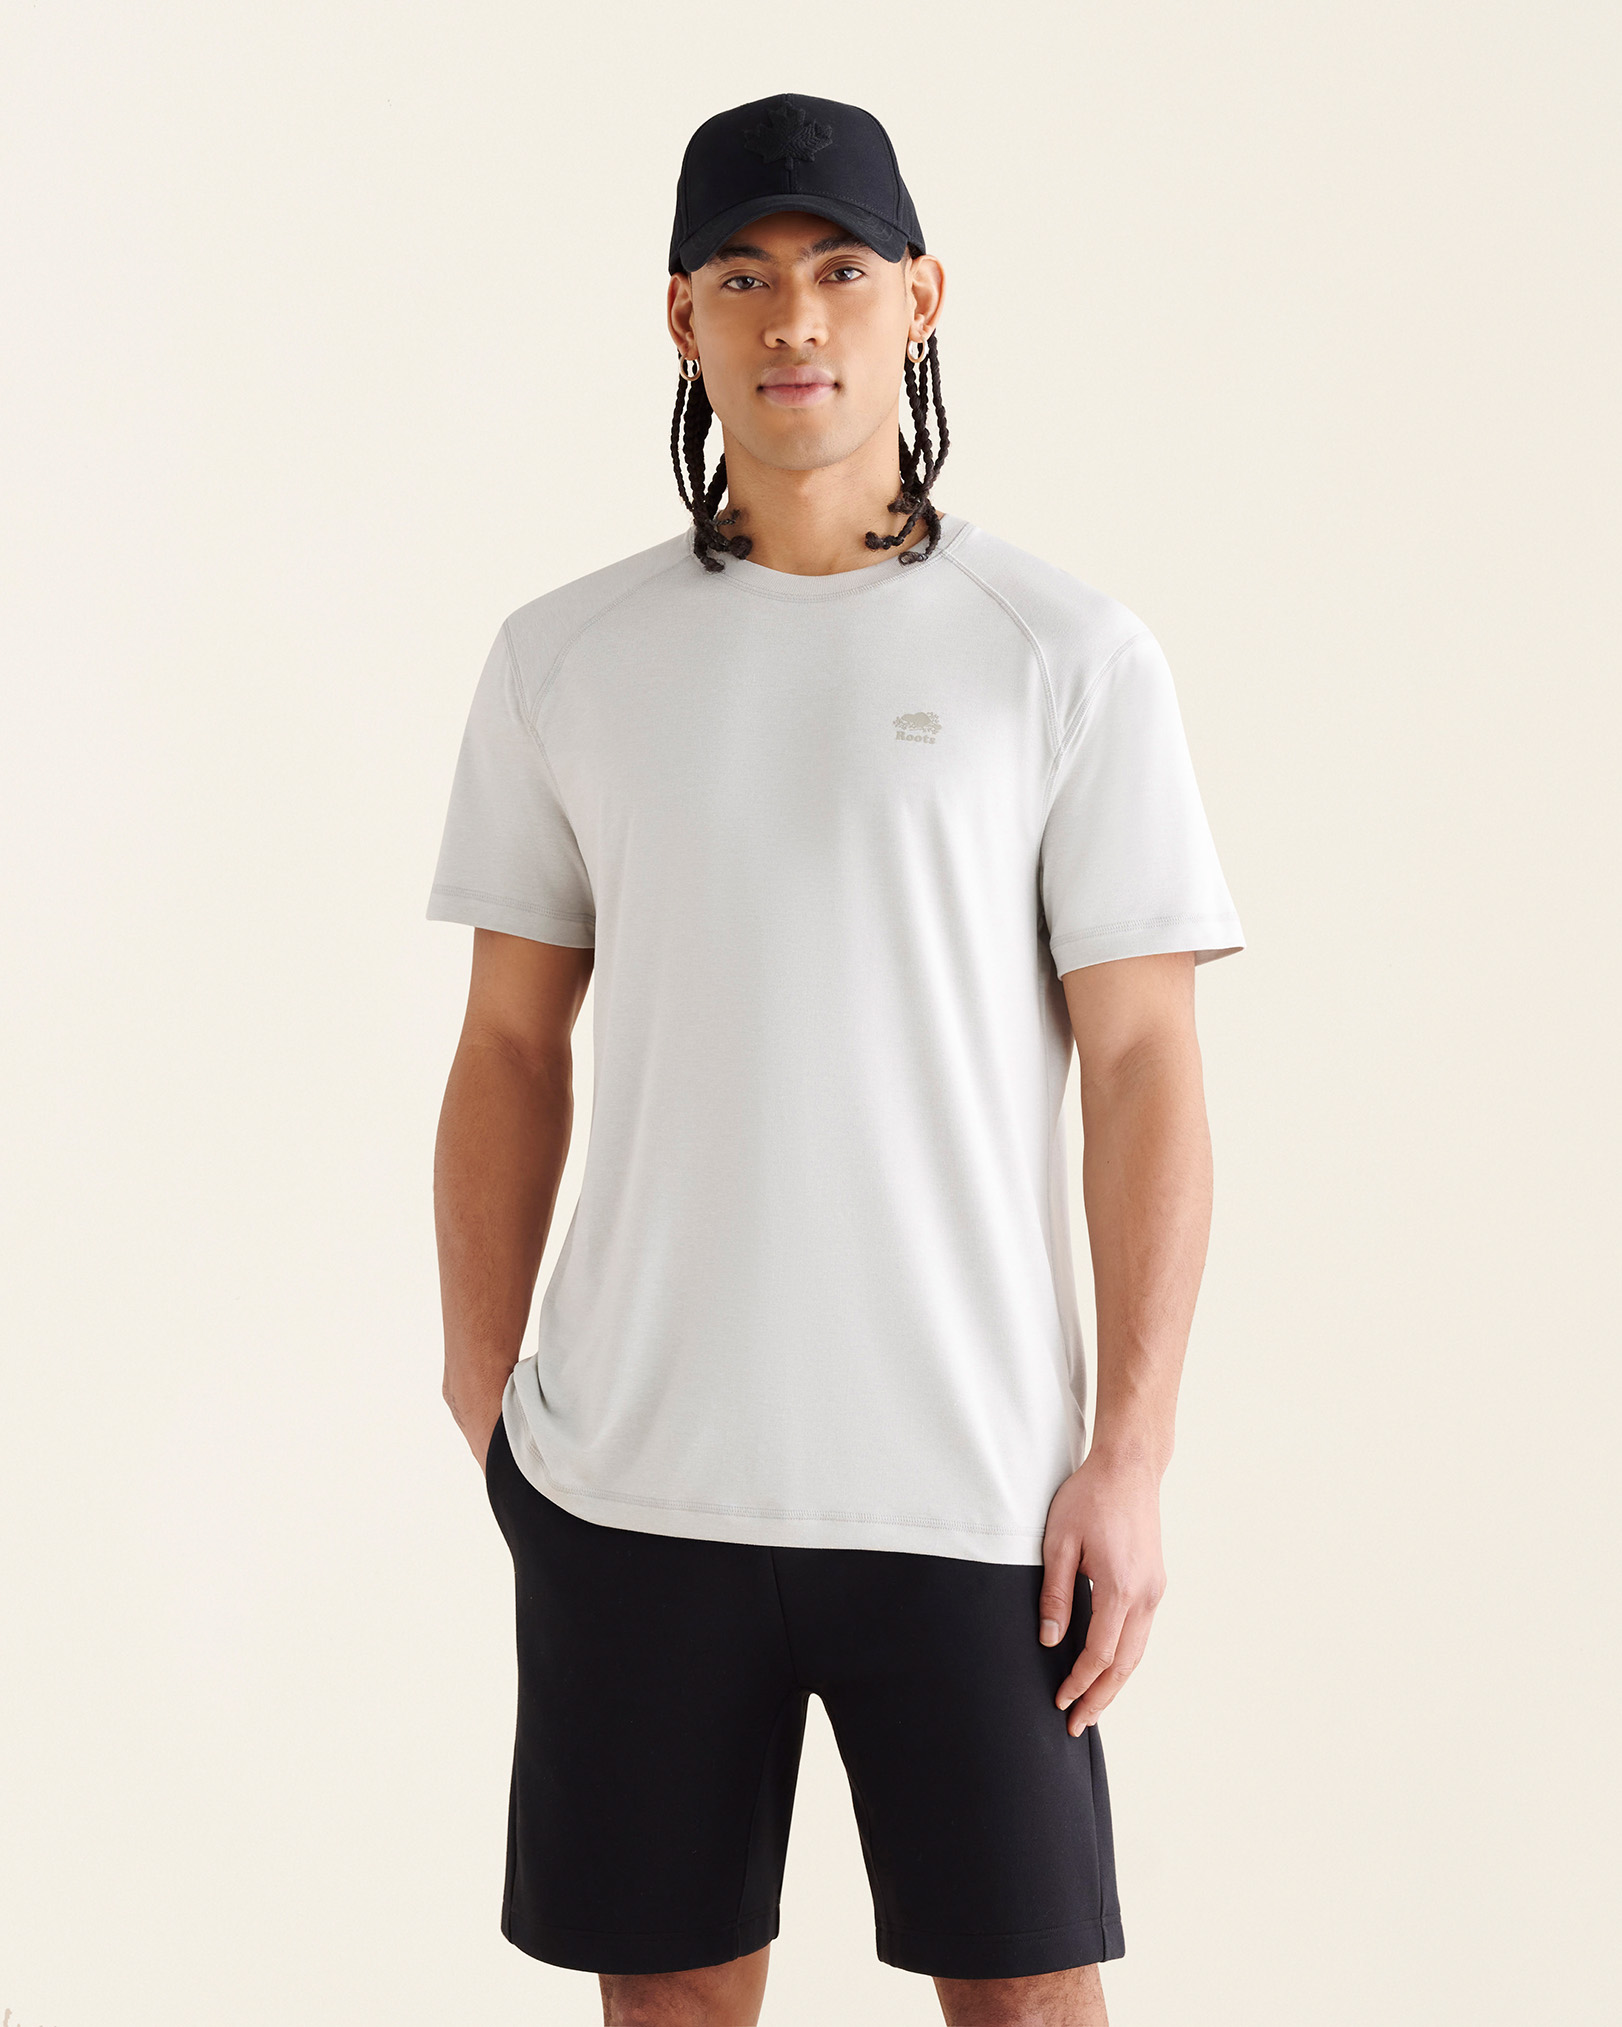 Roots Renew Short Sleeve T-Shirt in Pepper